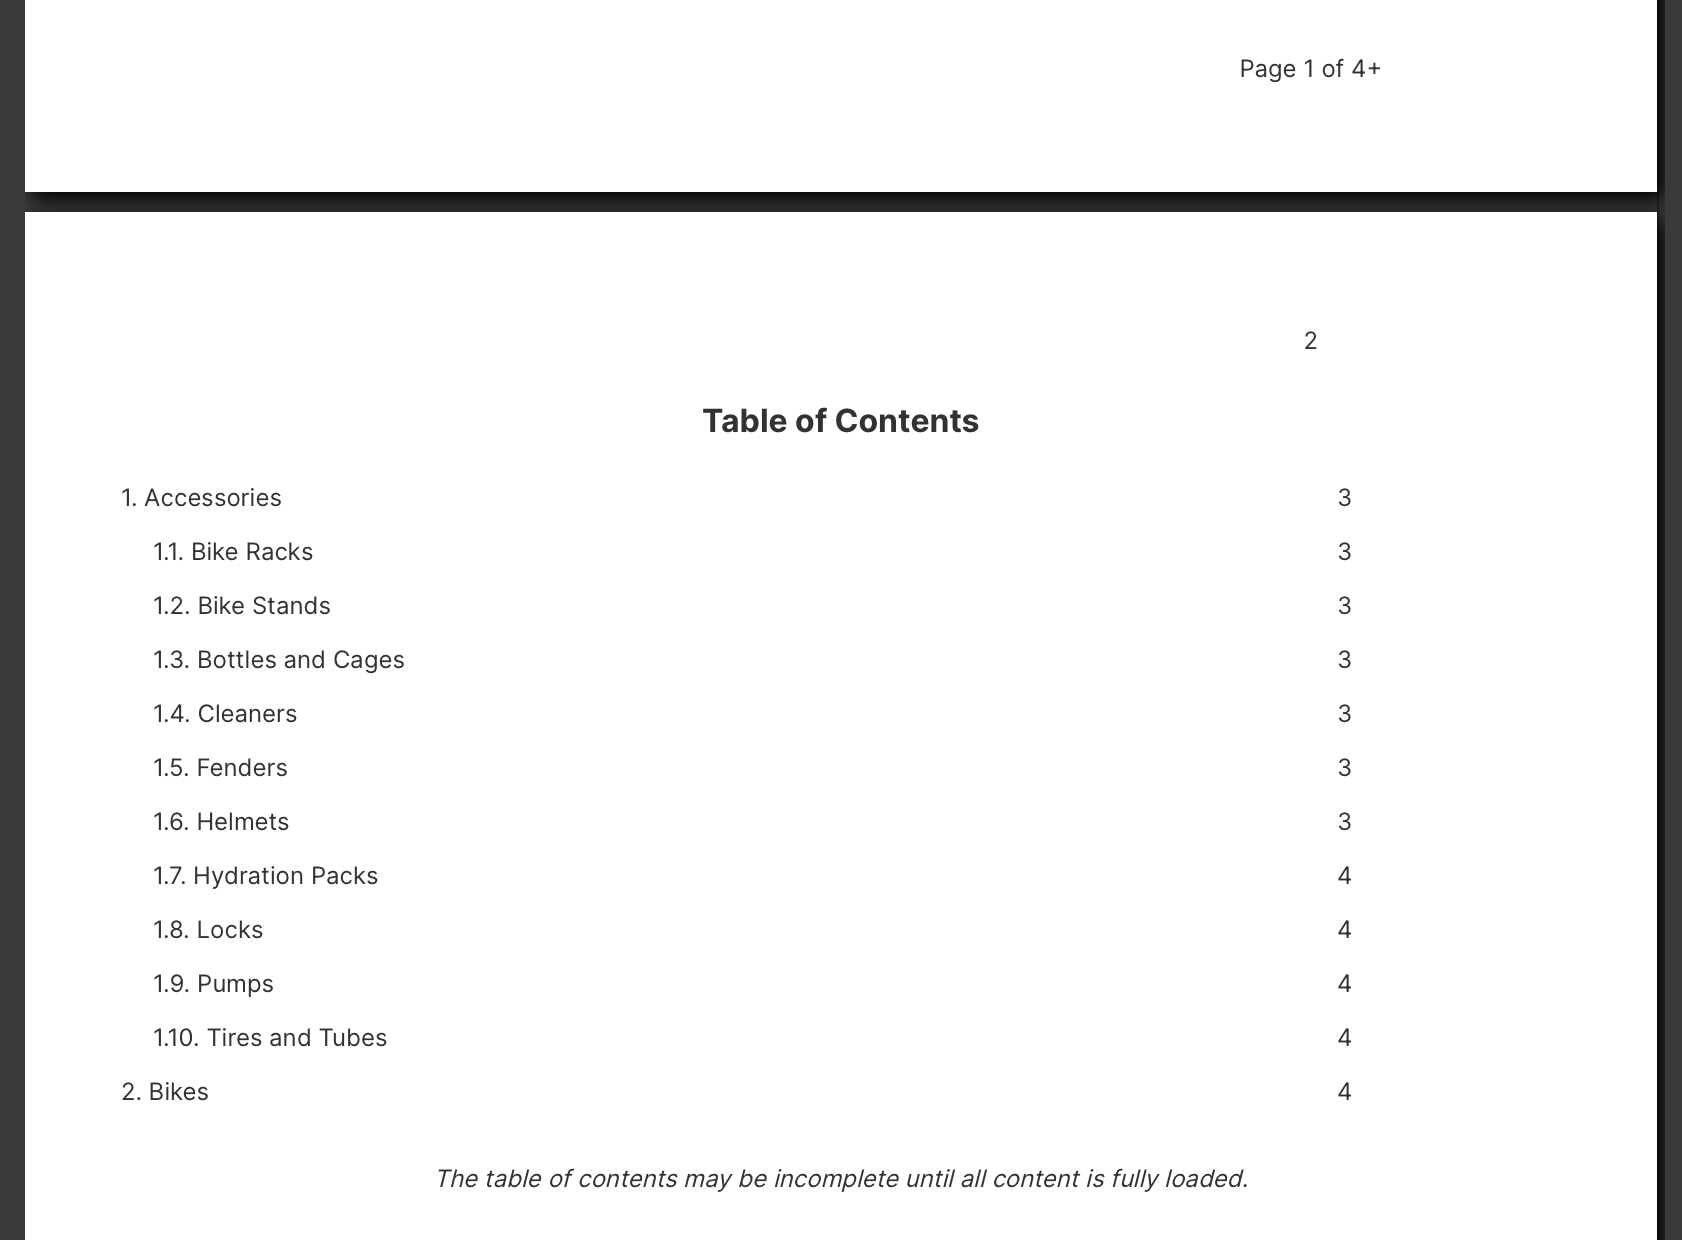 Viewing a table of contents in the browser